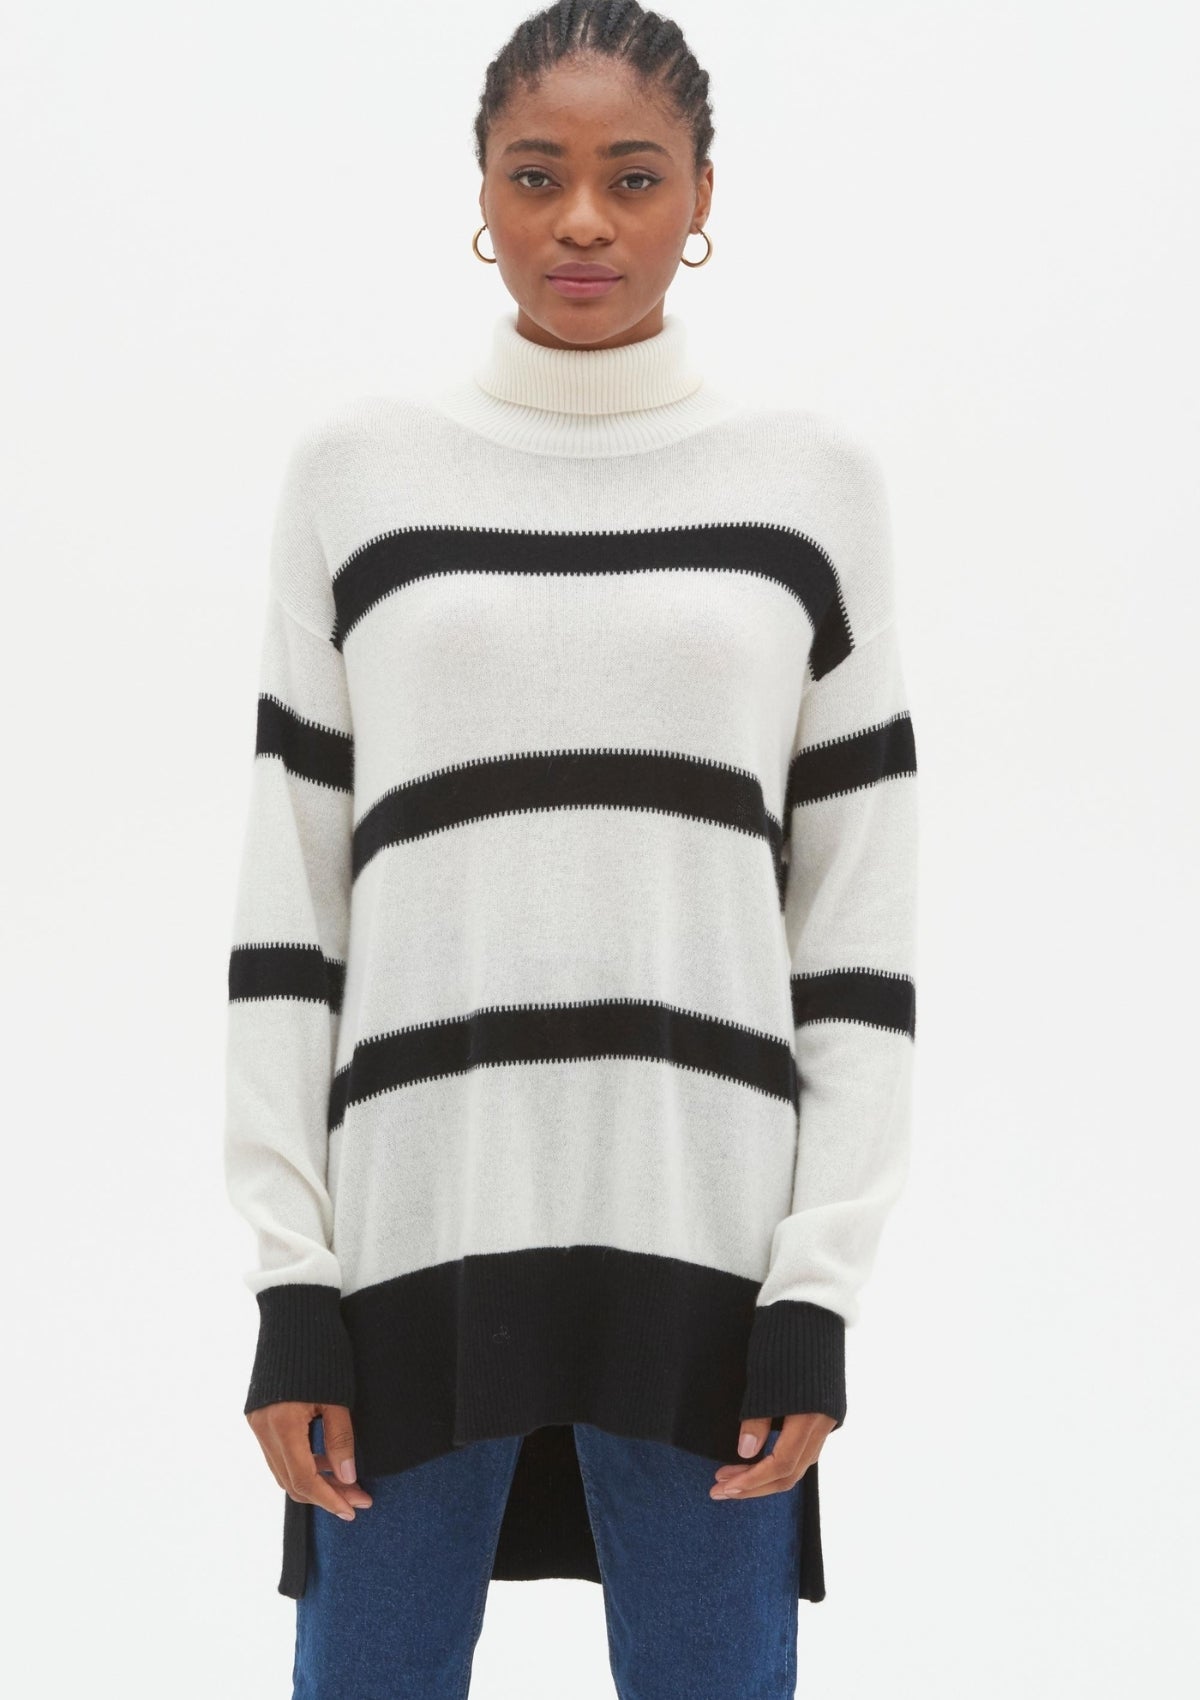 Relaxed Polo Neck Cashmere Sweater in Black/Snow Stripe